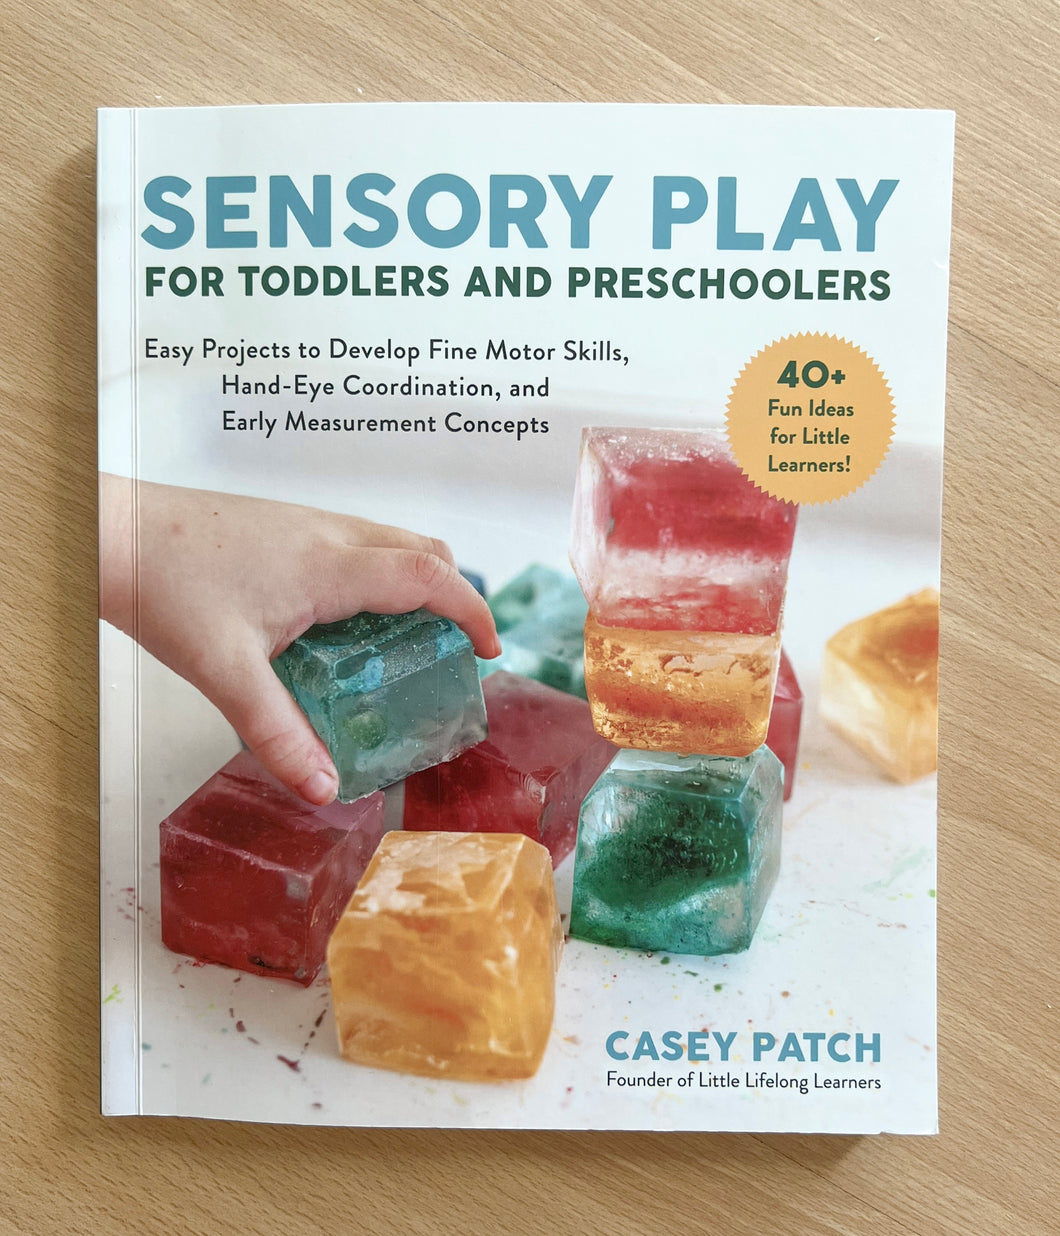 Sensory Play for Toddlers & Preschoolers Book